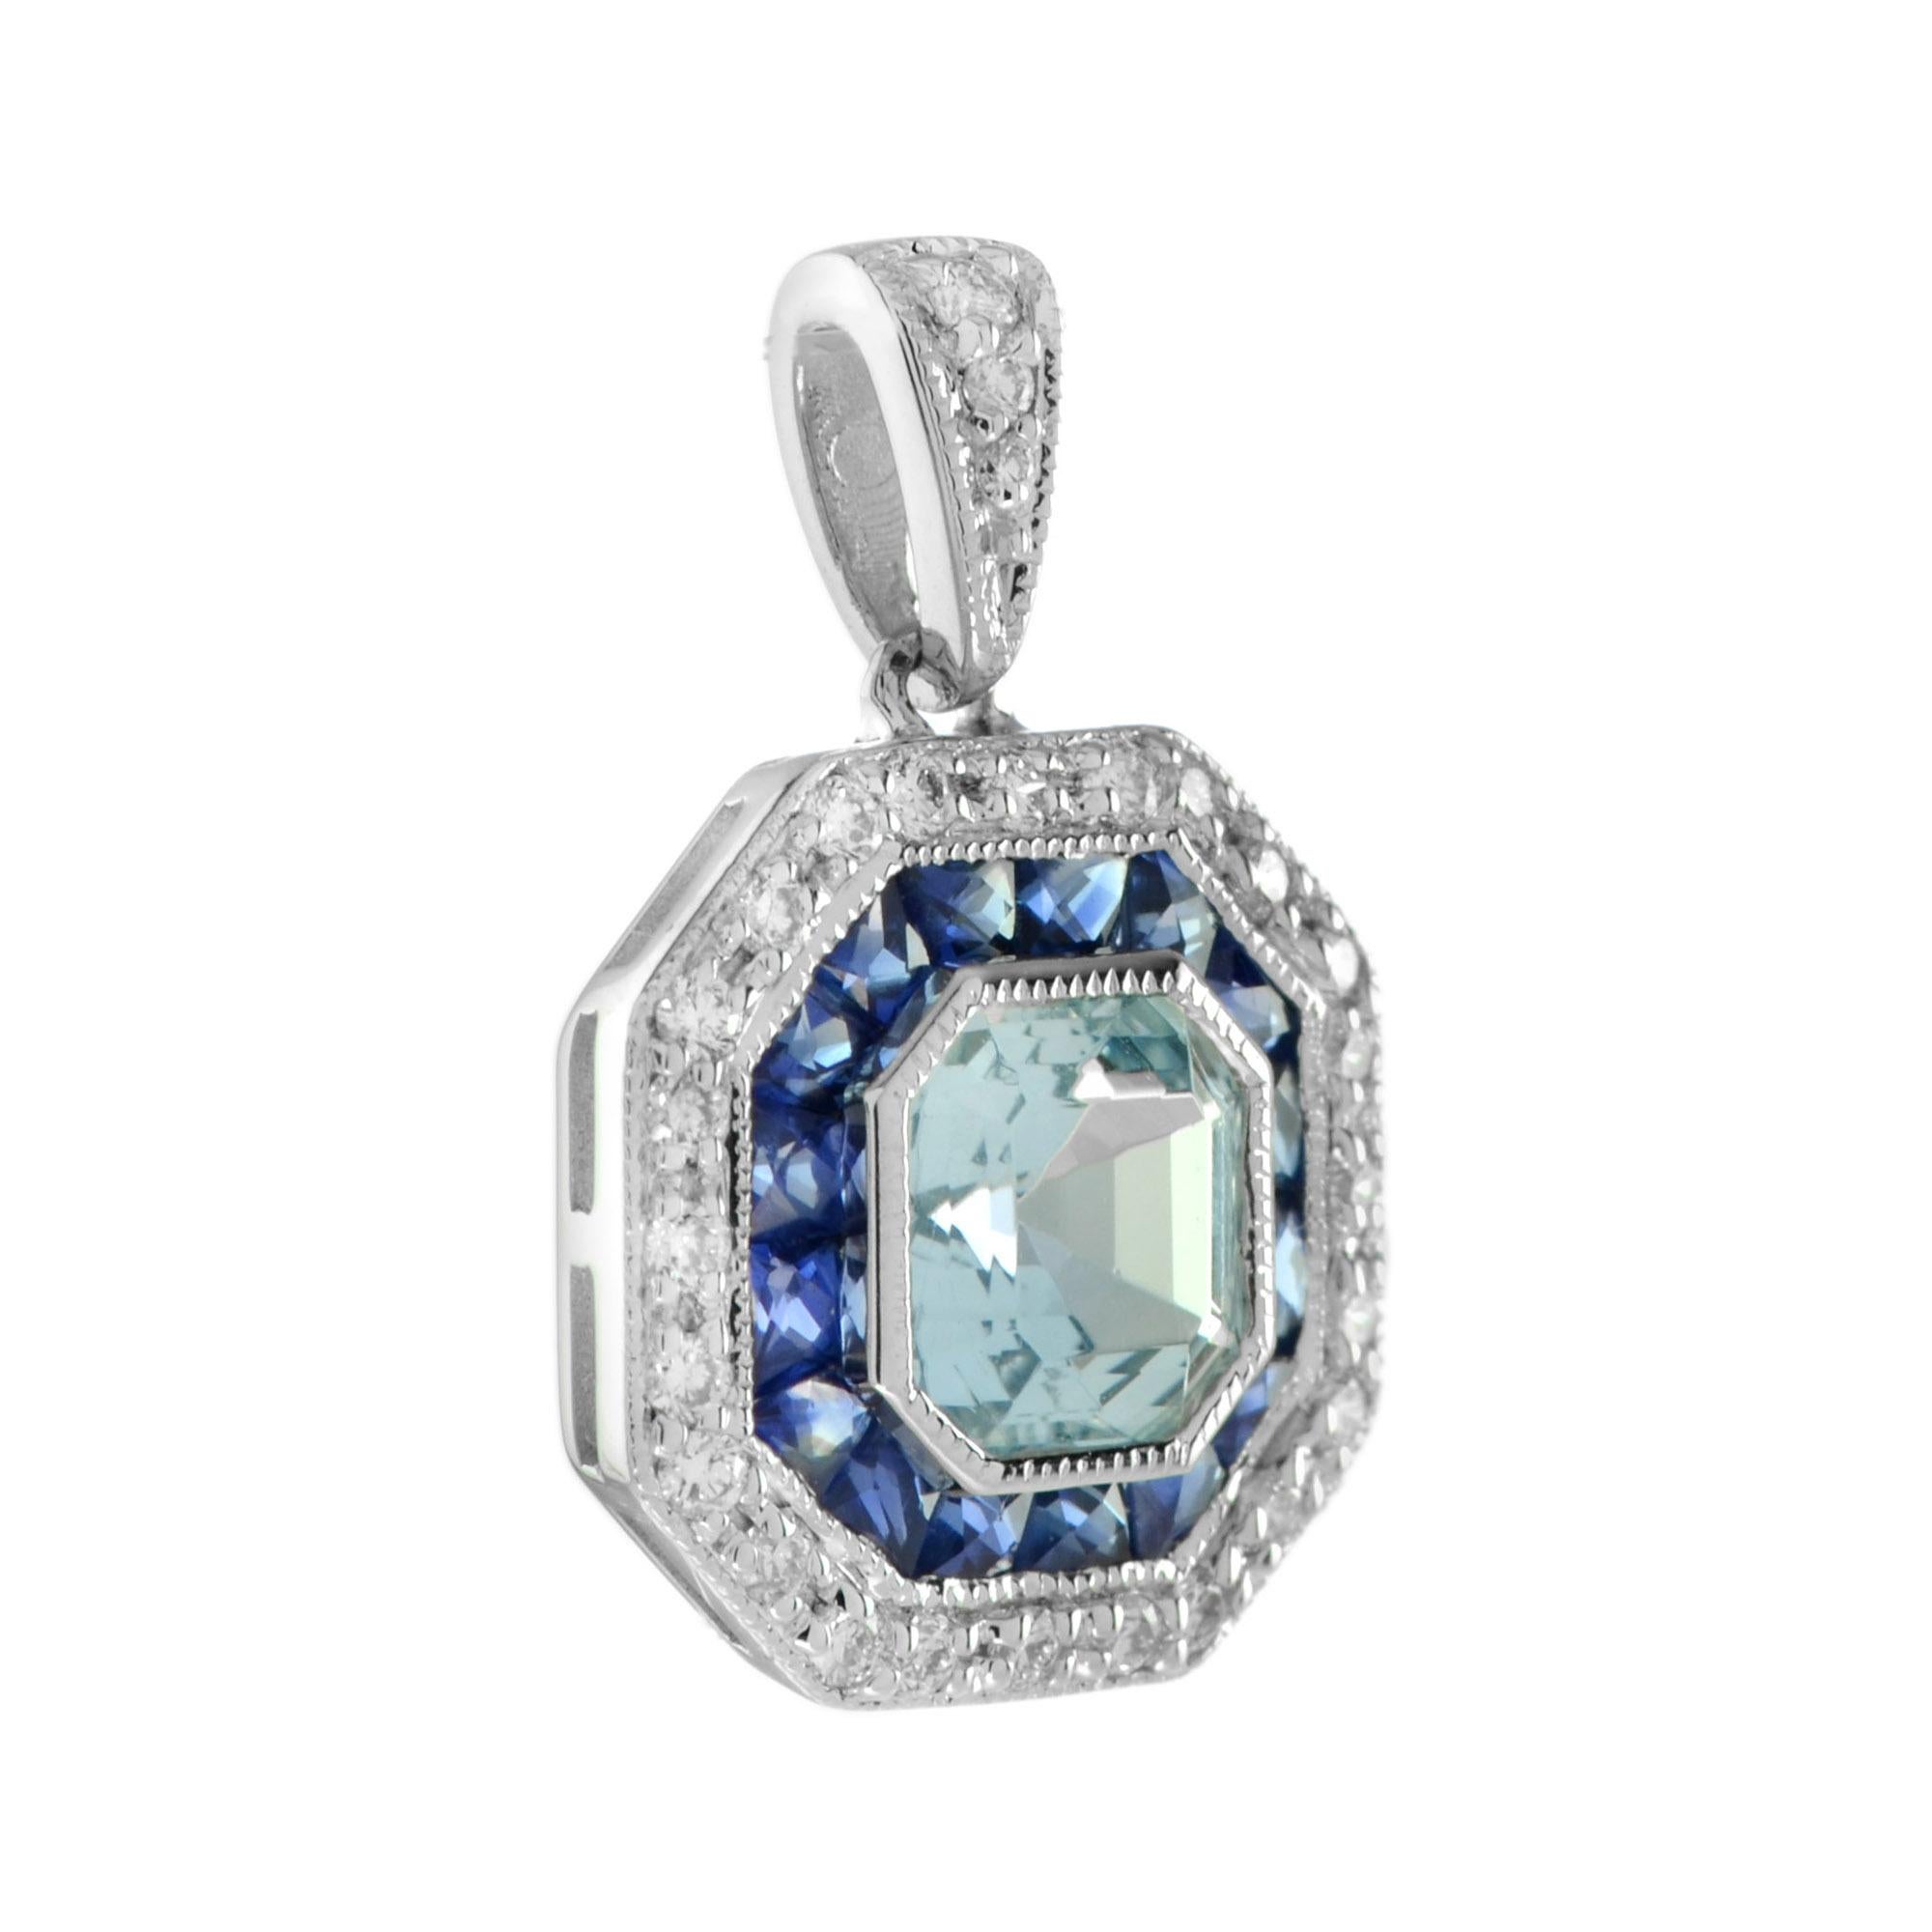 This aquamarine with sapphire and diamond pendant presents a stunning example of art deco styling and design. Emerald cut aquamarine, French cut sapphire, and round cut diamond are precisely arranged to create intricate patterns and a remarkable